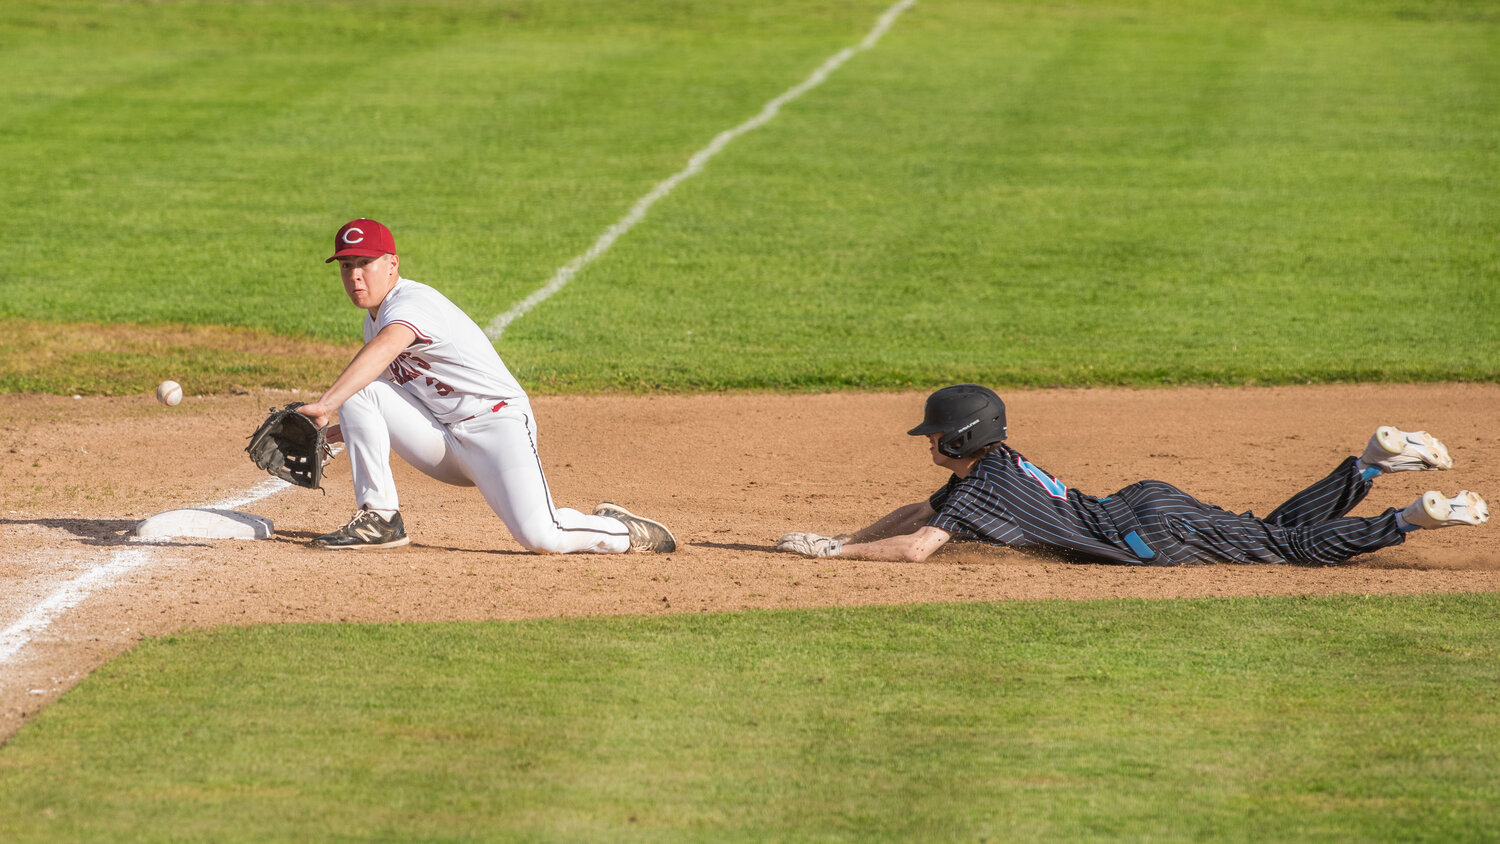 W.F. West’s Evan Stajduhar (3) receives a throw down to third base during a game against Mark Morris at Bearcat Stadium in Chehalis on Tuesday, May 9.